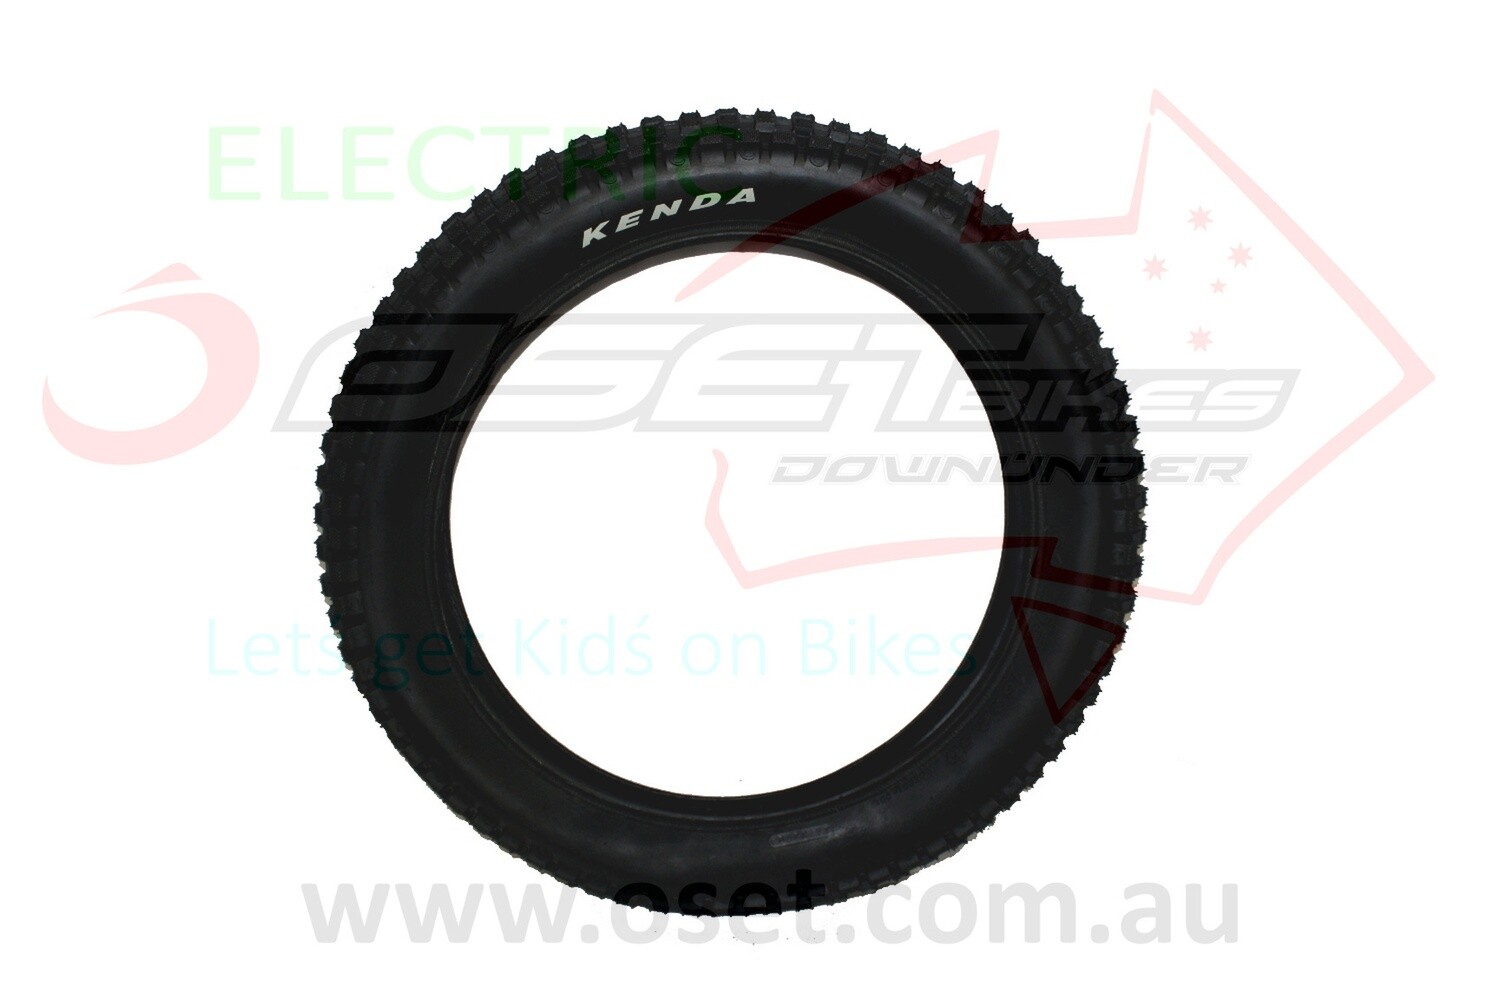 Tyre Front Kenda16"x2.5" for 16E,R